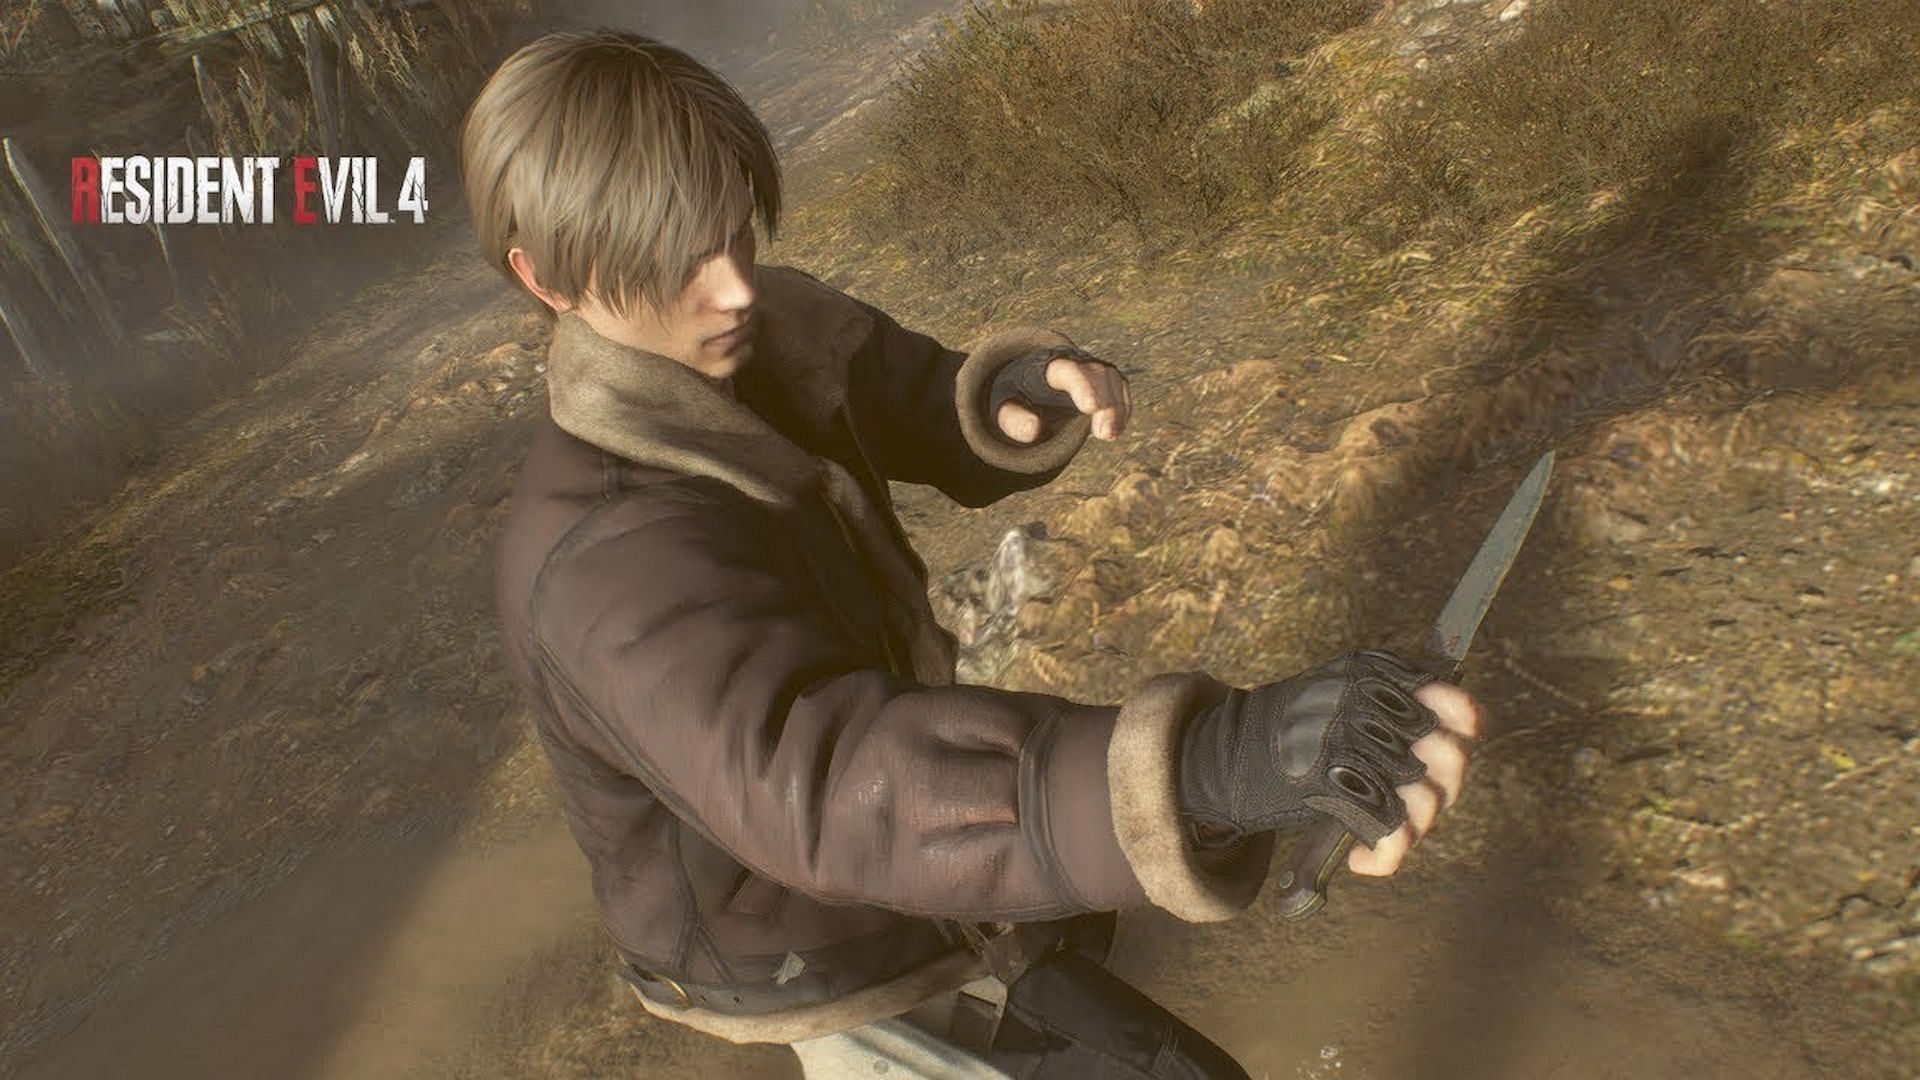 The Kitchen Knife is a breakable weapon in Resident Evil 4 Remake (Image via Capcom)